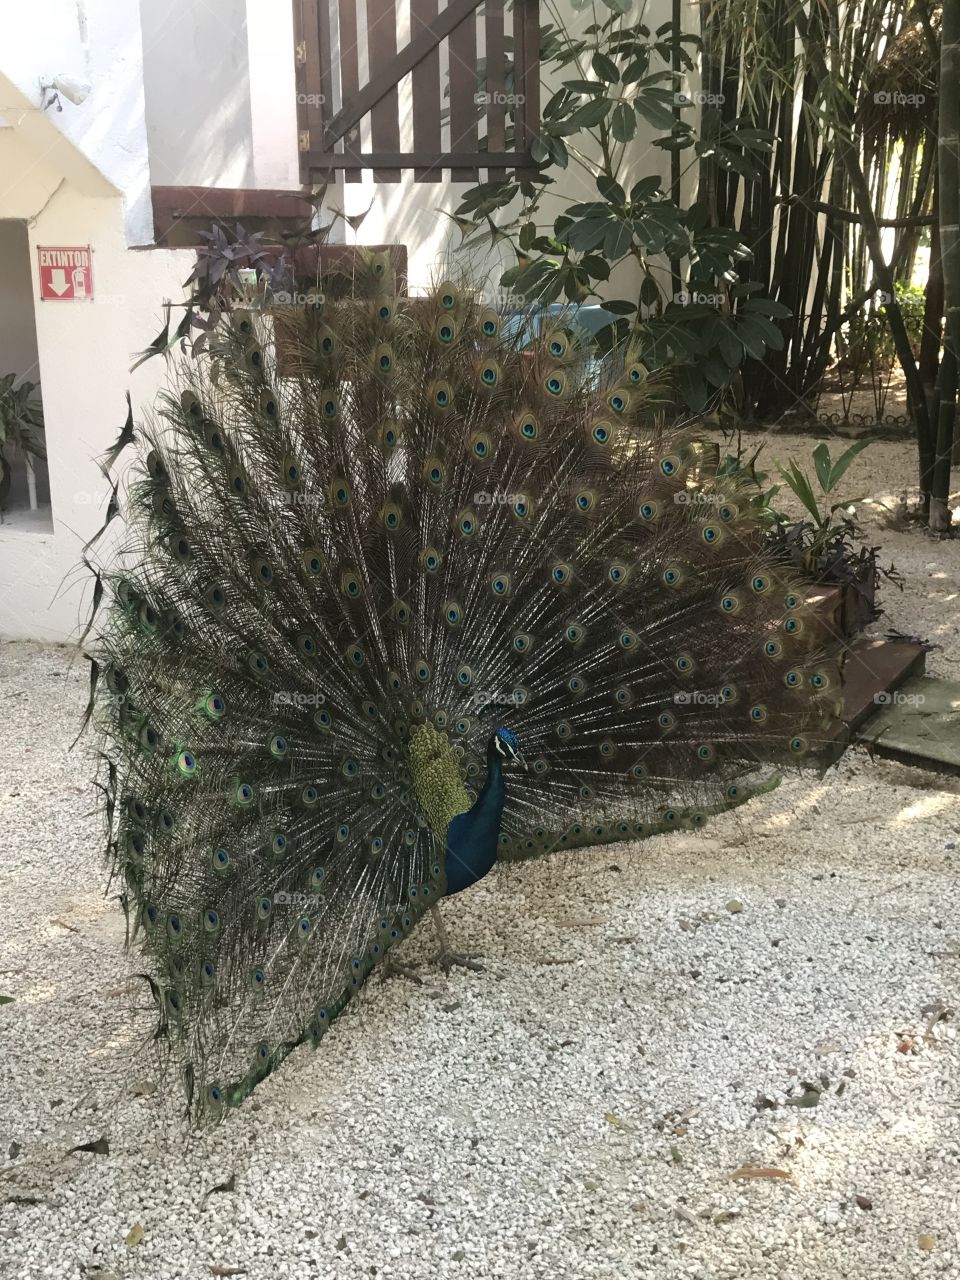 Peacock showing off